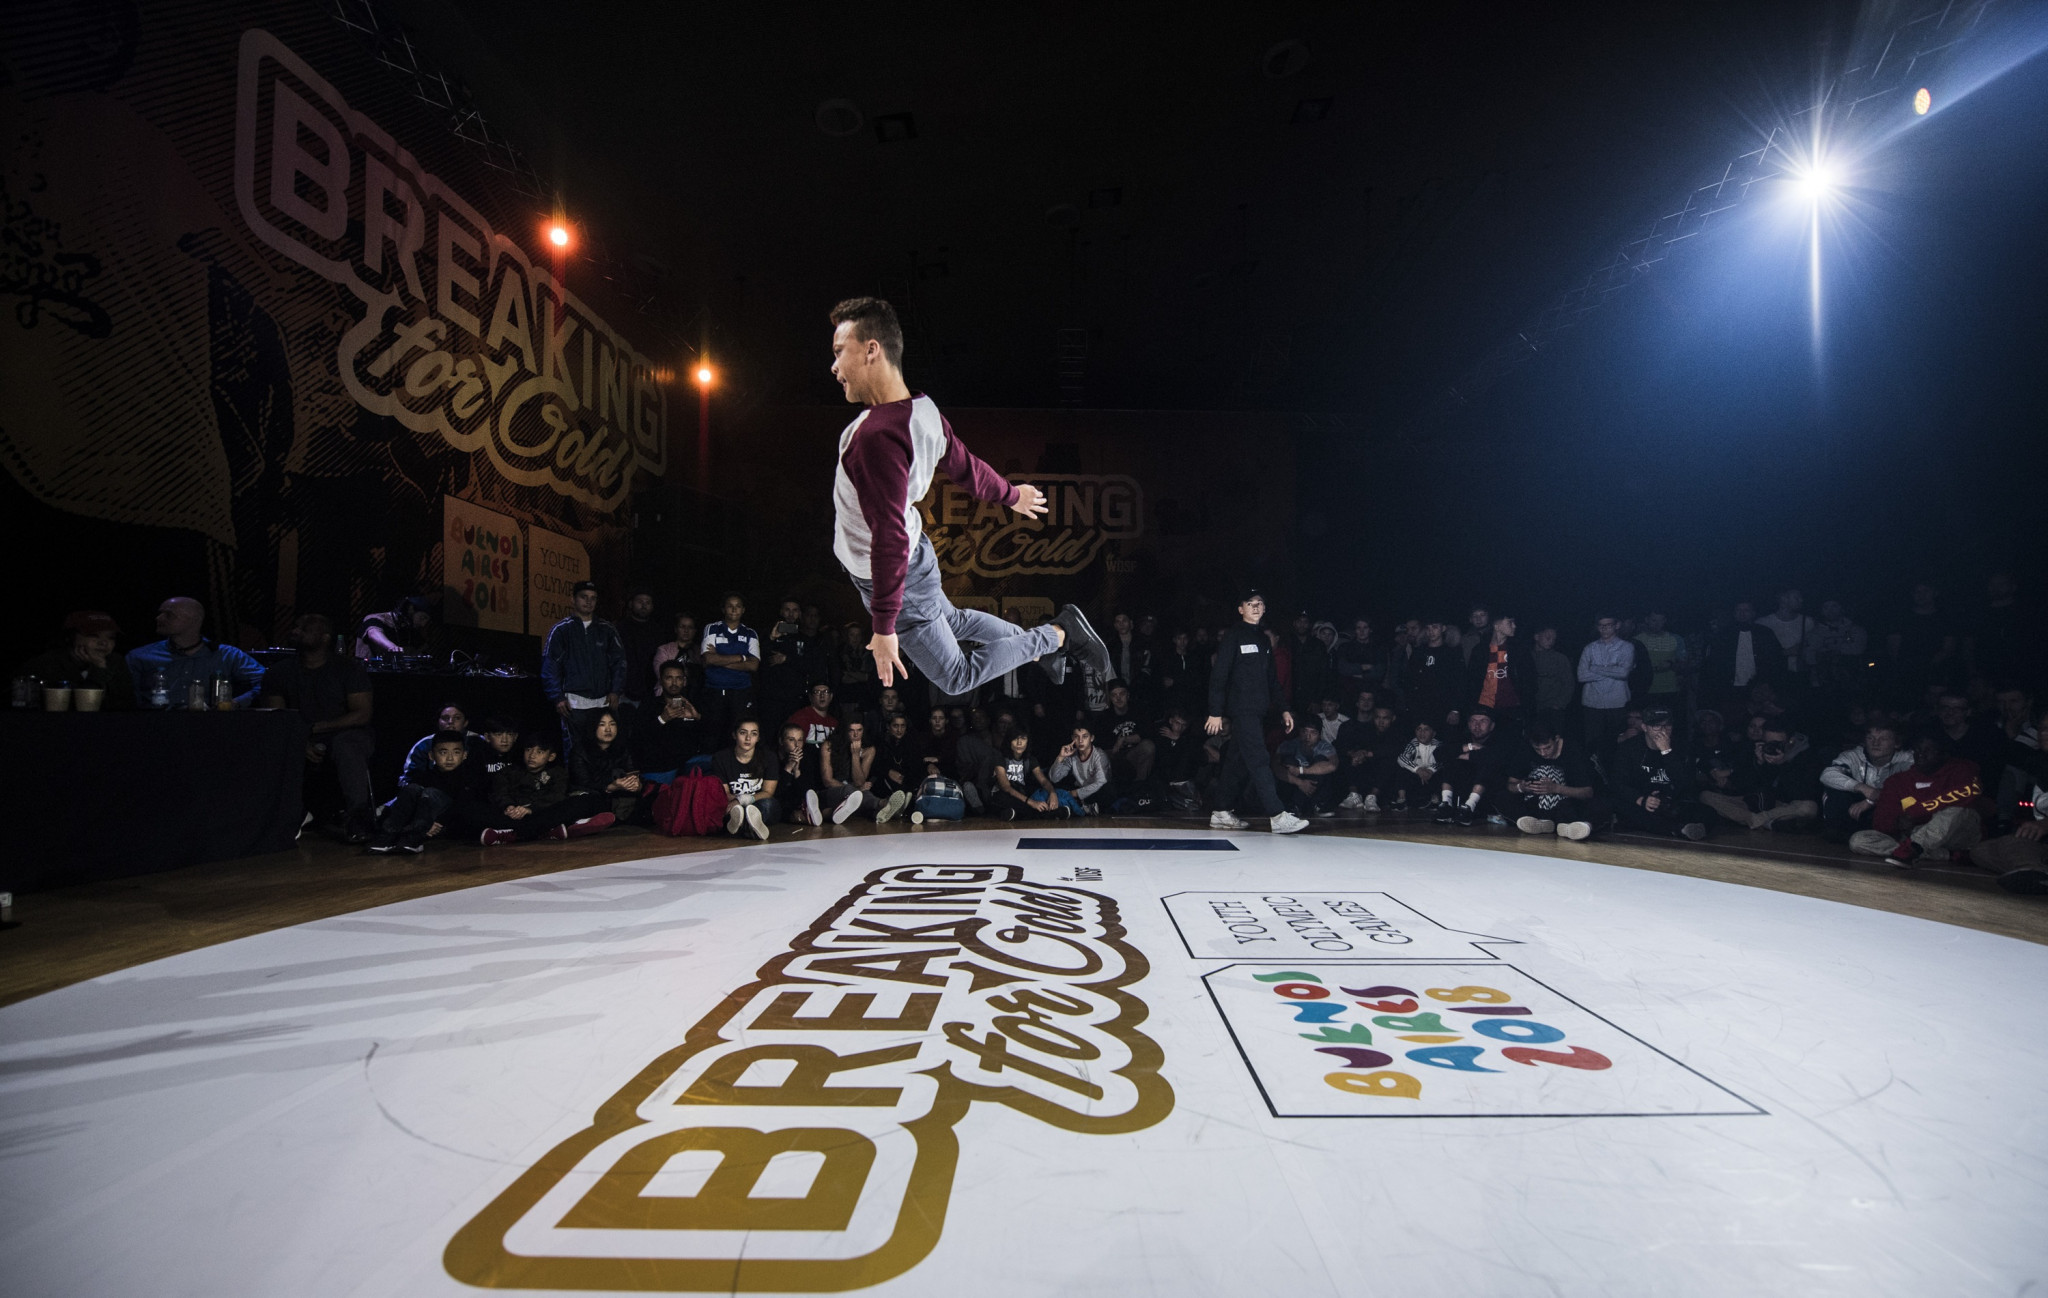 WDSF unveils athlete line-up for Buenos Aires 2018 Youth Olympic Games